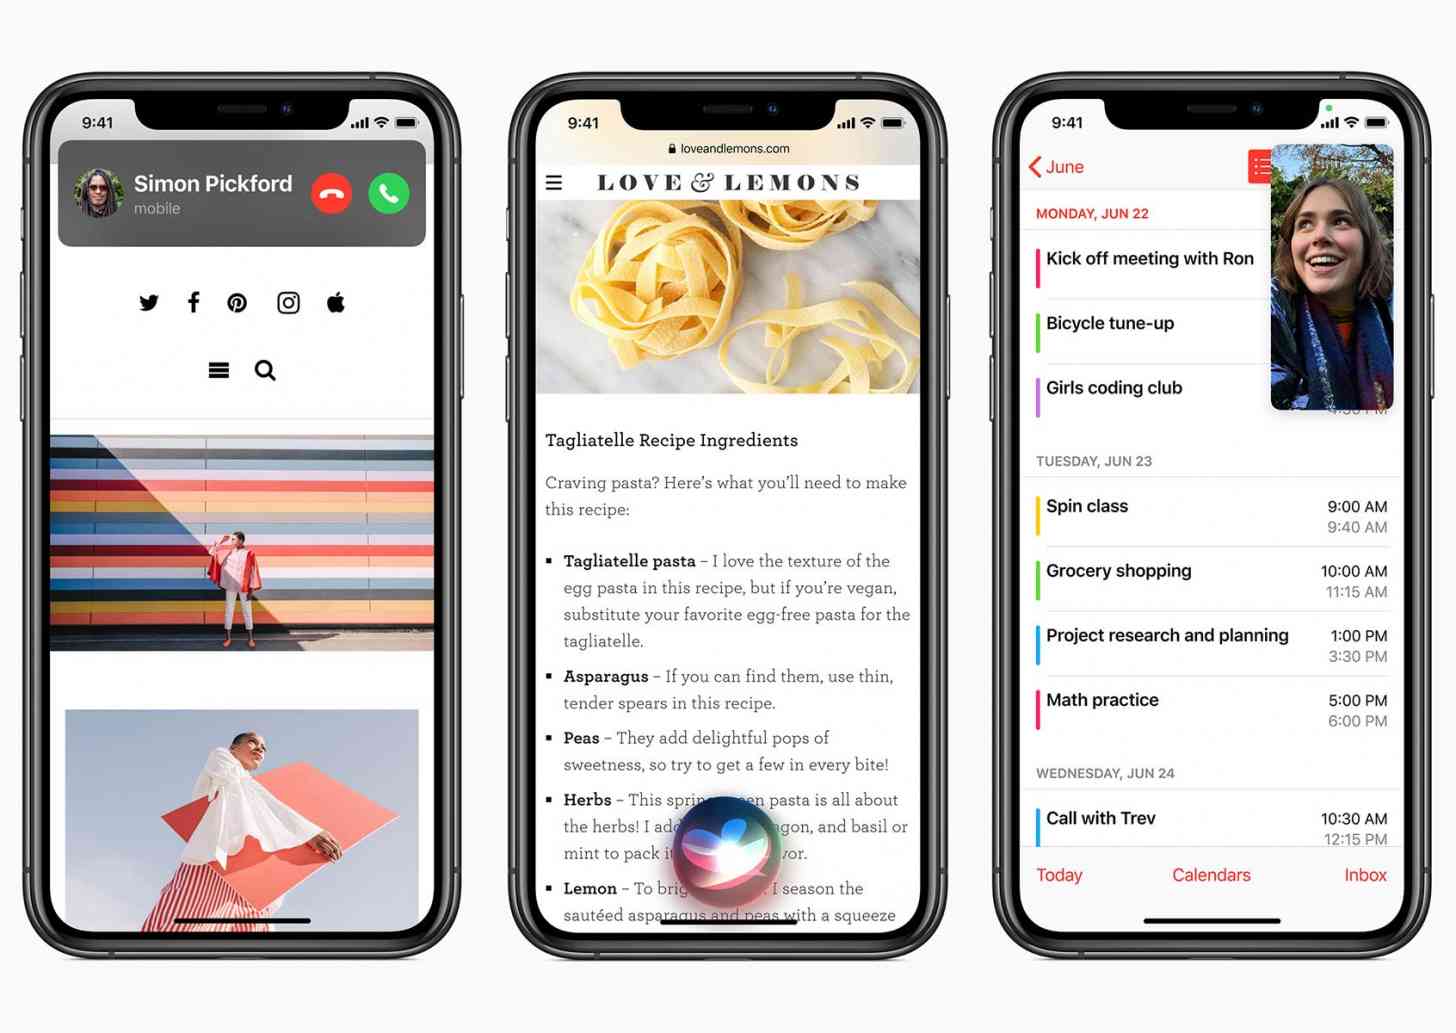 iOS 14 smaller incoming calls, Siri, picture-in-picture